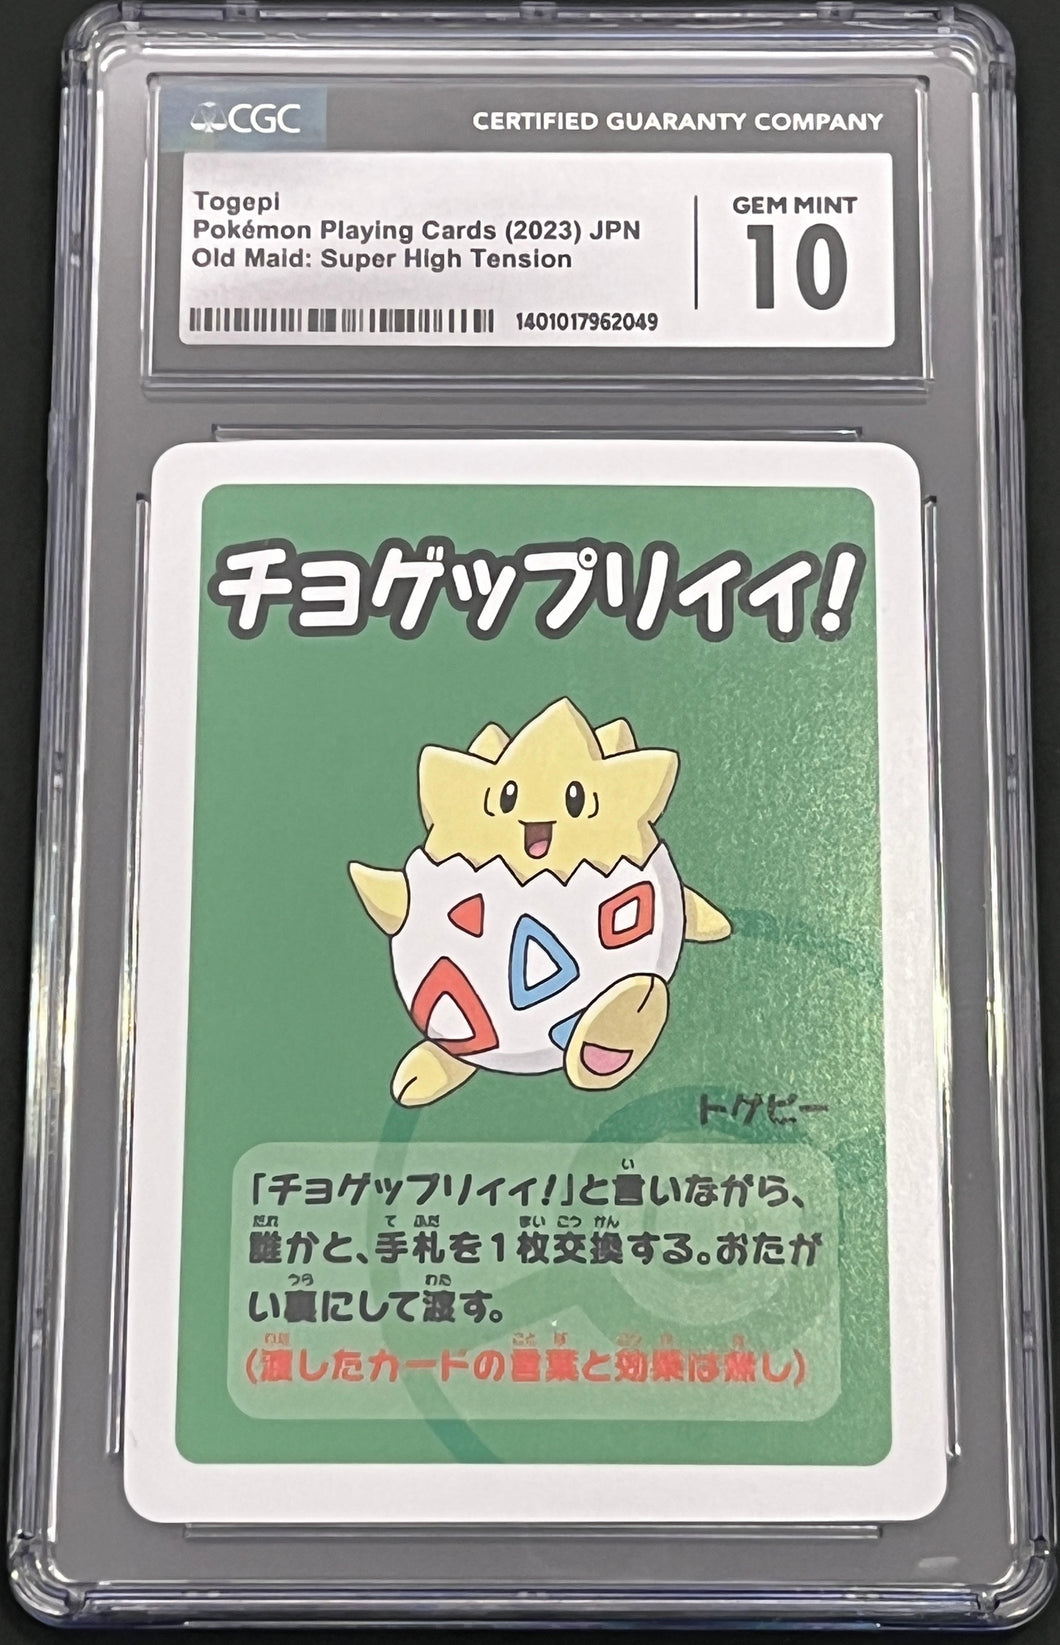 Togepi Pokemon playing cards (2023) Japanese Old Maid : Super High Tension CGC Gem Mint 10